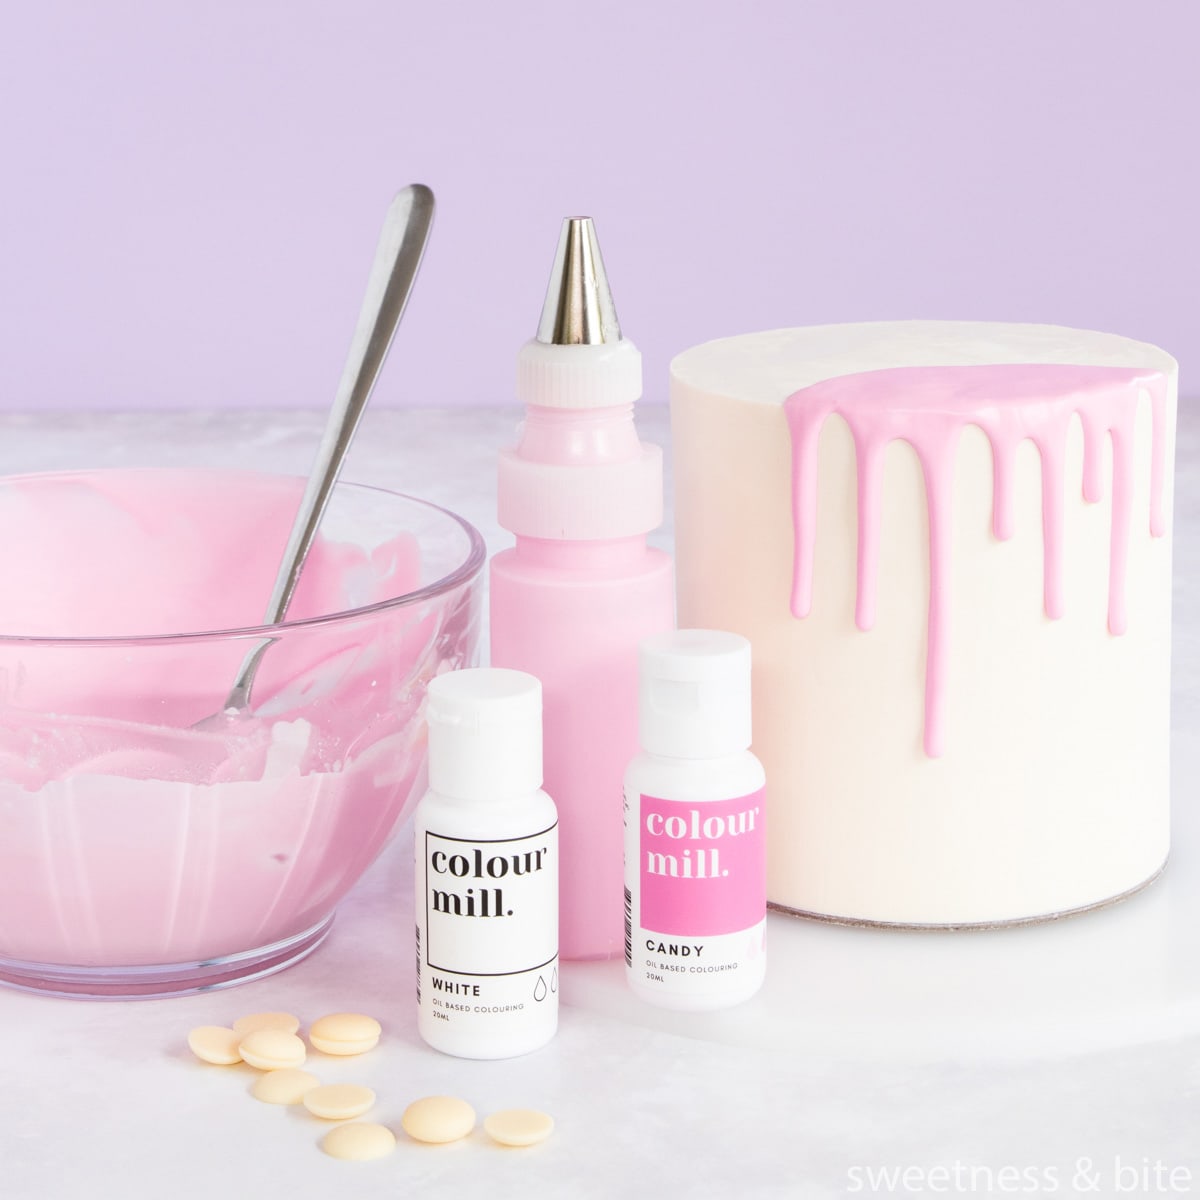 Pink ganache in a bowl, a white cake with a pink ganache drip, and two bottles of Colour Mill oil-based food colouring.